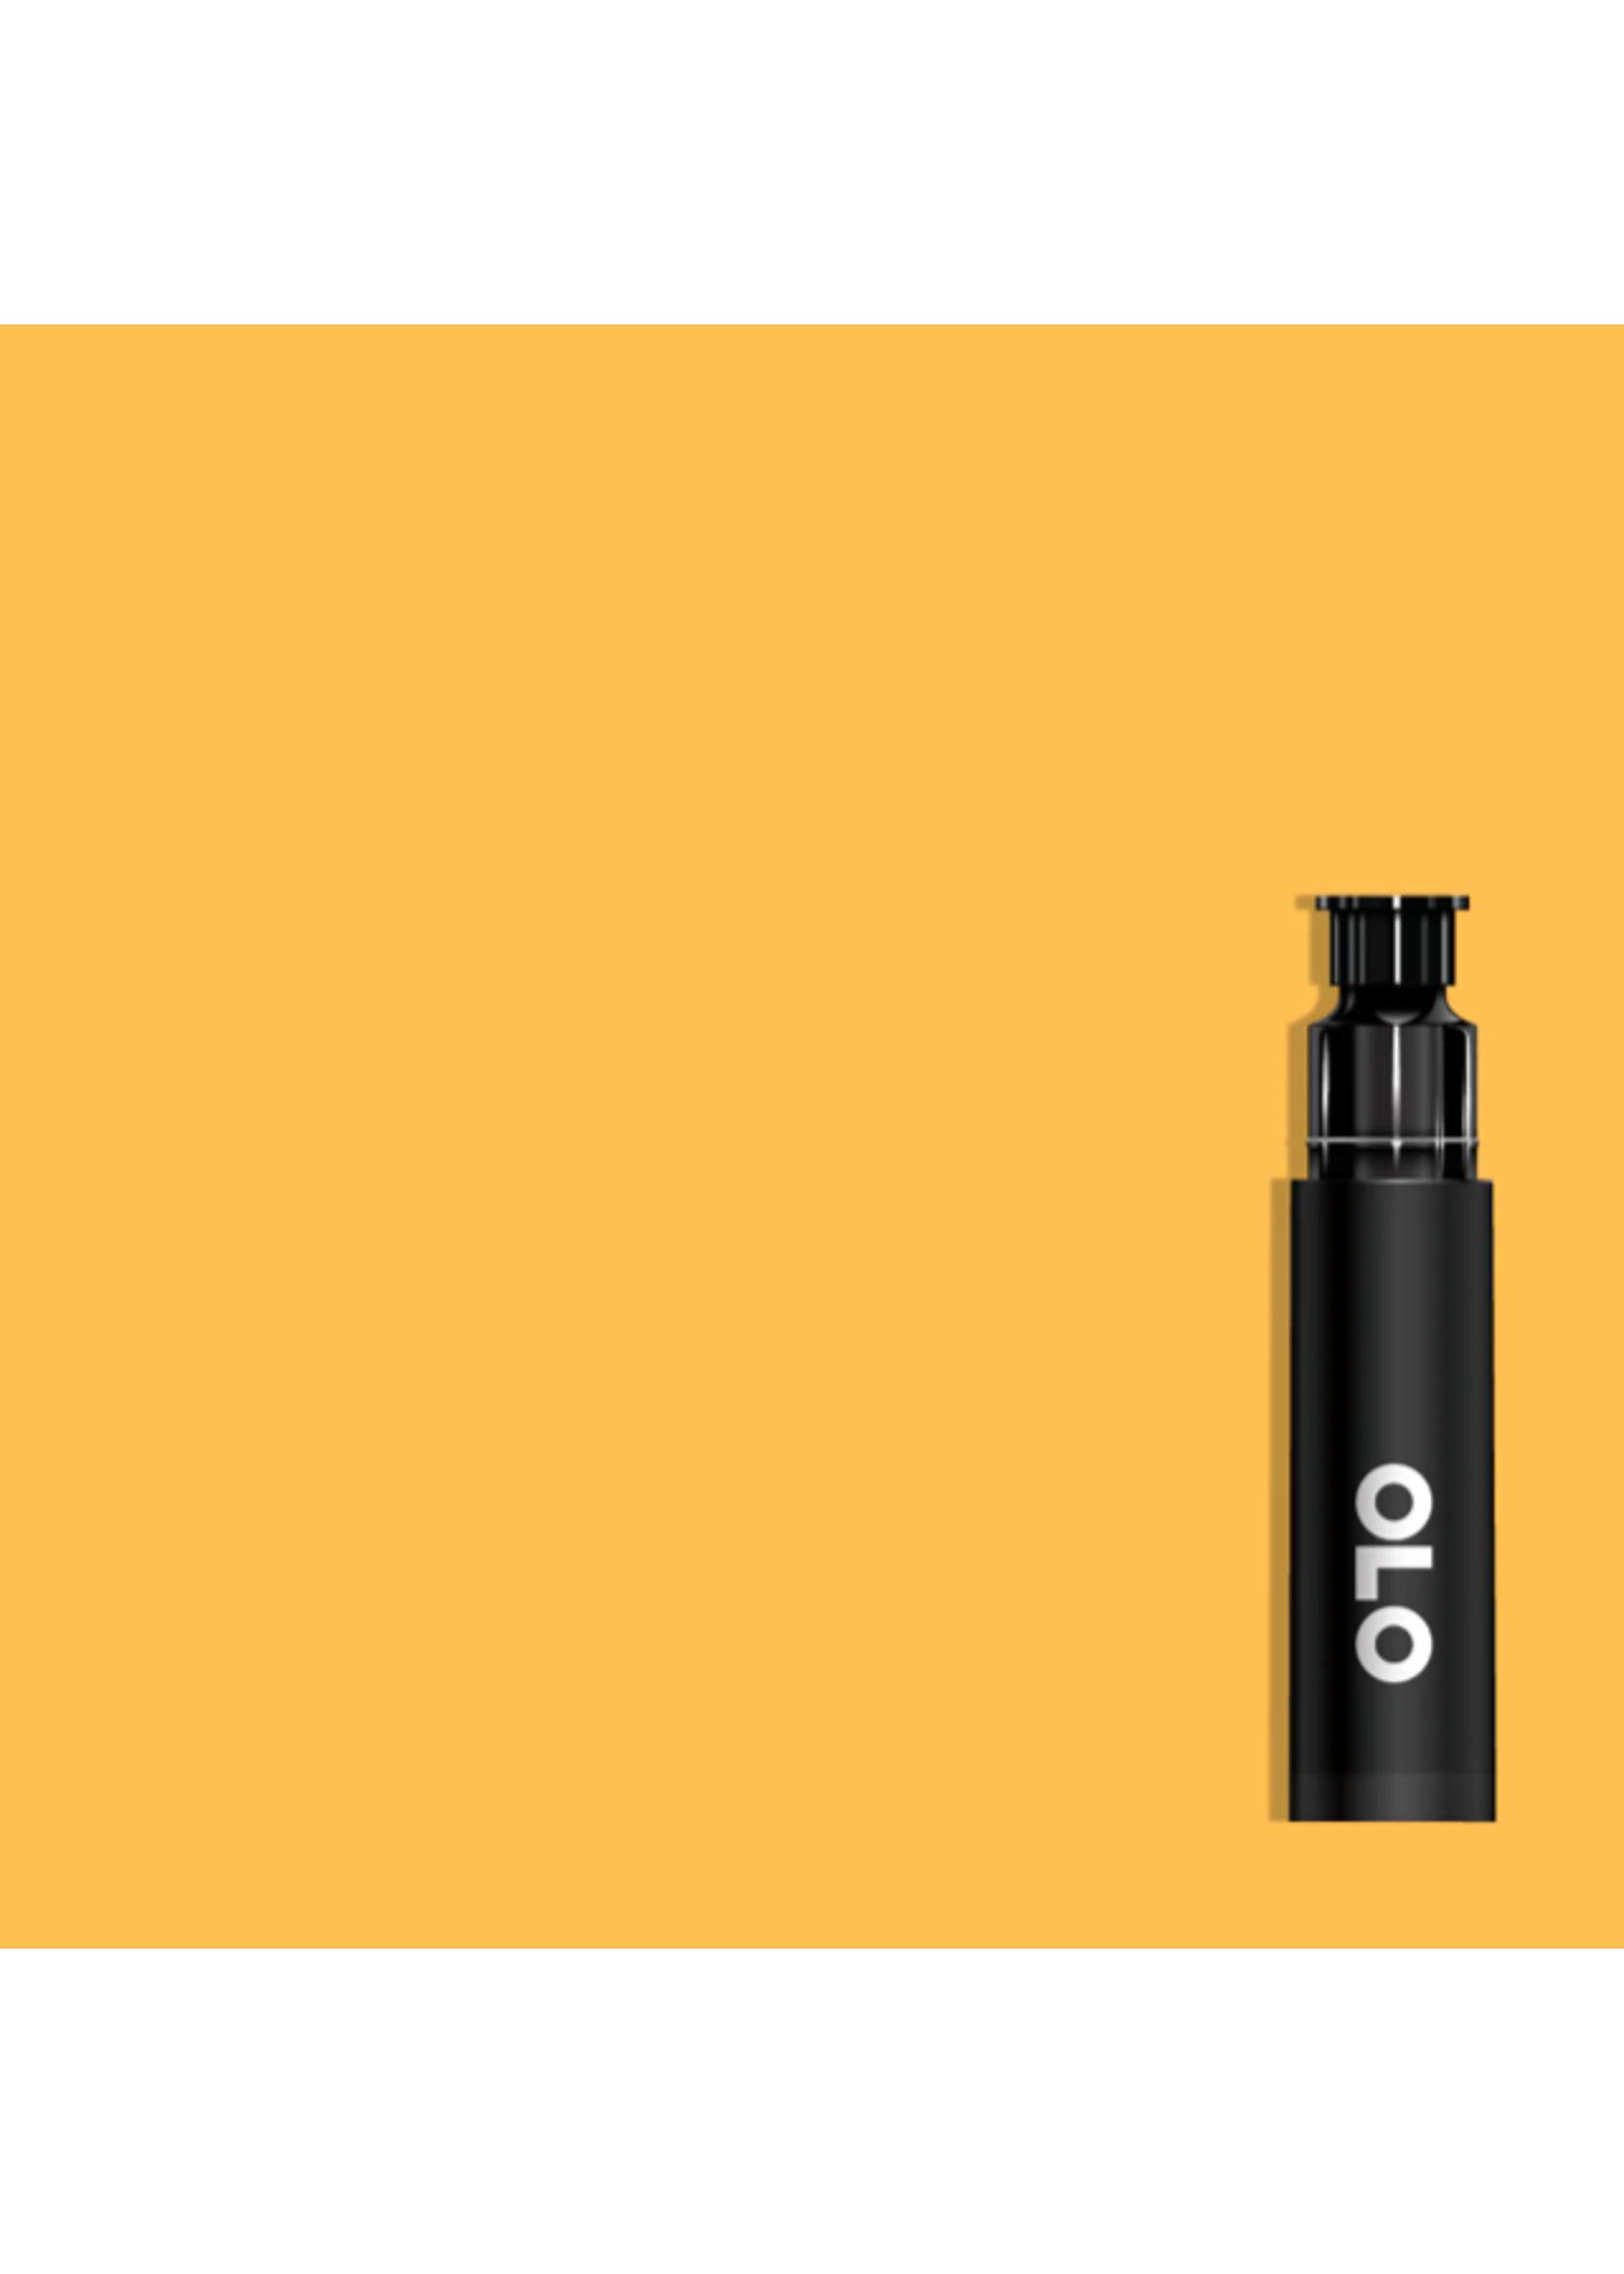 OLO OLO Brush Replacement Cartridge: Butterscotch